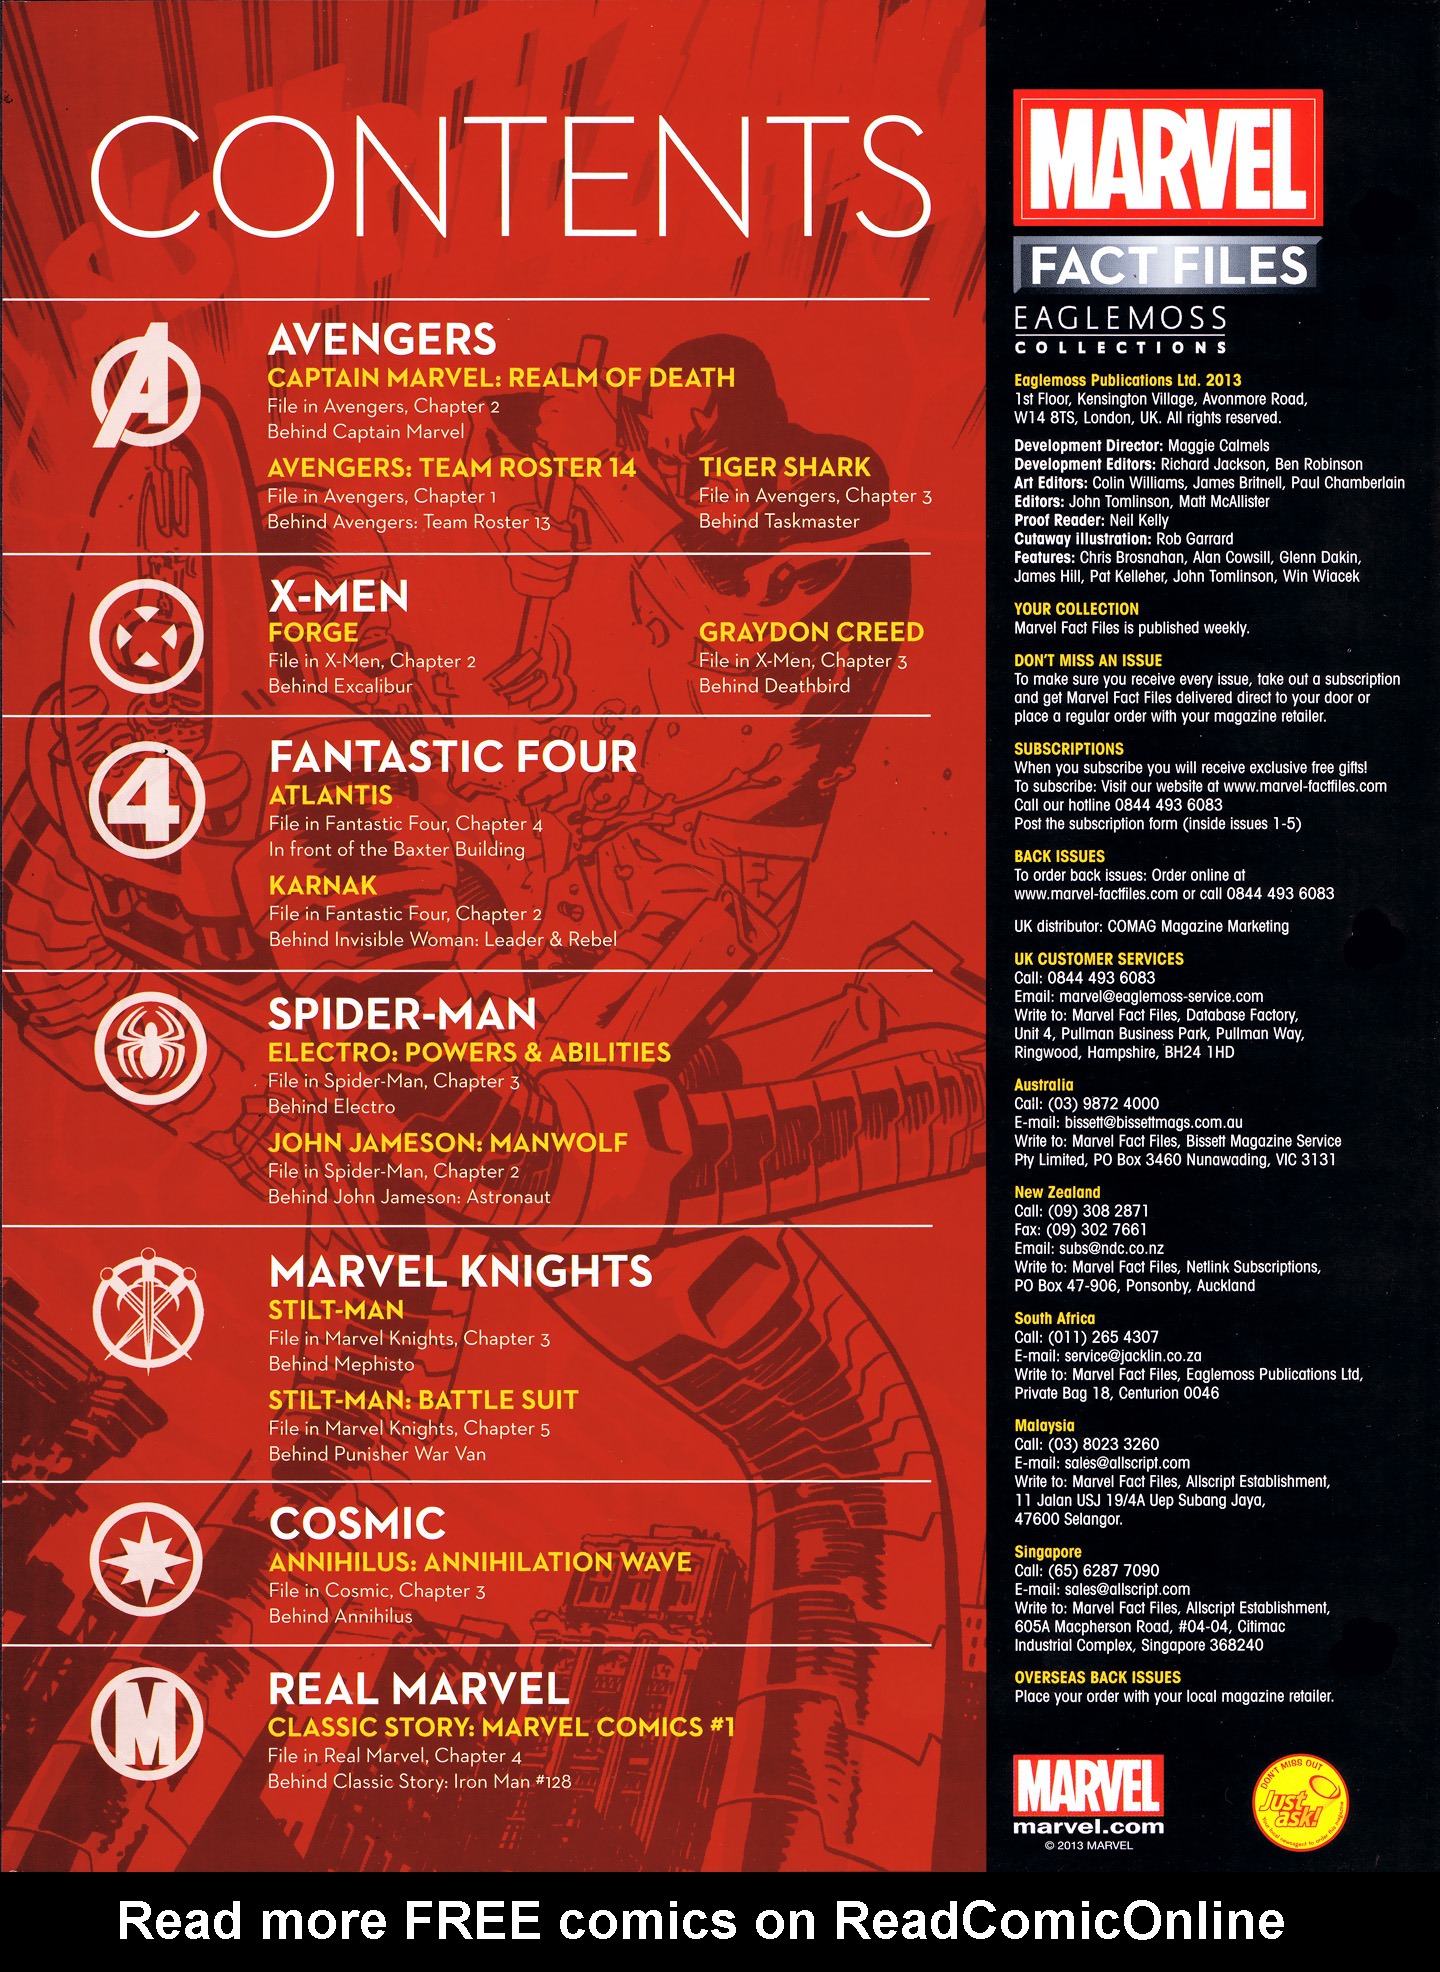 Read online Marvel Fact Files comic -  Issue #41 - 3